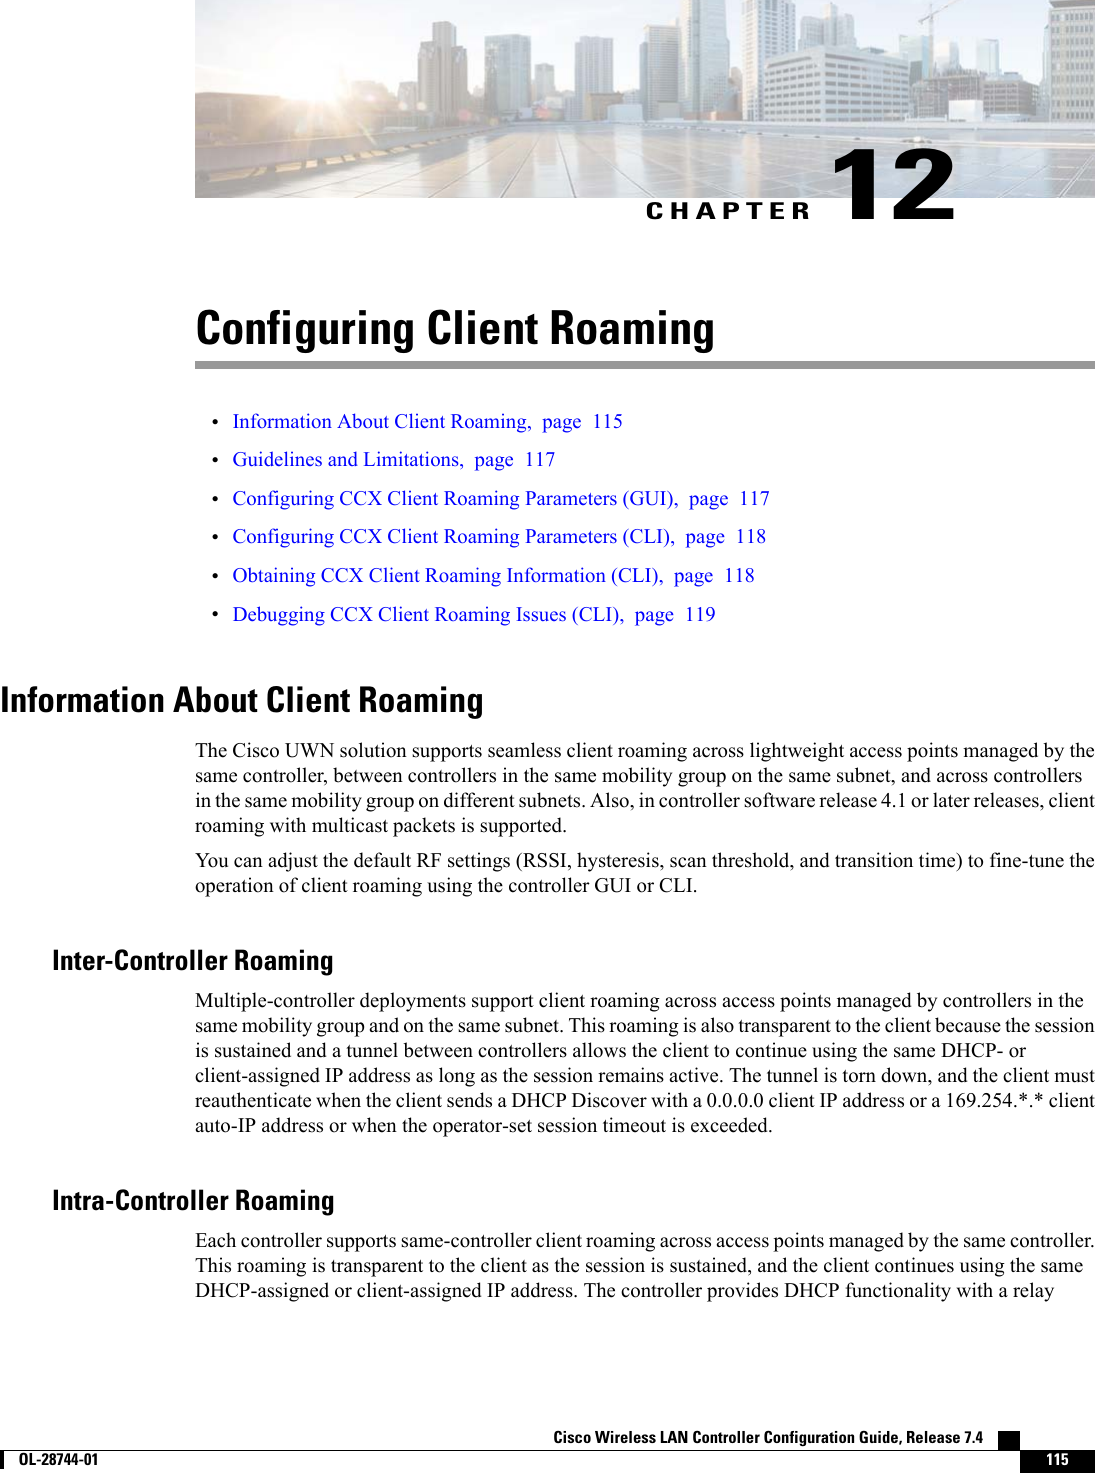 CHAPTER 12Configuring Client Roaming•Information About Client Roaming, page 115•Guidelines and Limitations, page 117•Configuring CCX Client Roaming Parameters (GUI), page 117•Configuring CCX Client Roaming Parameters (CLI), page 118•Obtaining CCX Client Roaming Information (CLI), page 118•Debugging CCX Client Roaming Issues (CLI), page 119Information About Client RoamingThe Cisco UWN solution supports seamless client roaming across lightweight access points managed by thesame controller, between controllers in the same mobility group on the same subnet, and across controllersin the same mobility group on different subnets. Also, in controller software release 4.1 or later releases, clientroaming with multicast packets is supported.You can adjust the default RF settings (RSSI, hysteresis, scan threshold, and transition time) to fine-tune theoperation of client roaming using the controller GUI or CLI.Inter-Controller RoamingMultiple-controller deployments support client roaming across access points managed by controllers in thesame mobility group and on the same subnet. This roaming is also transparent to the client because the sessionis sustained and a tunnel between controllers allows the client to continue using the same DHCP- orclient-assigned IP address as long as the session remains active. The tunnel is torn down, and the client mustreauthenticate when the client sends a DHCP Discover with a 0.0.0.0 client IP address or a 169.254.*.* clientauto-IP address or when the operator-set session timeout is exceeded.Intra-Controller RoamingEach controller supports same-controller client roaming across access points managed by the same controller.This roaming is transparent to the client as the session is sustained, and the client continues using the sameDHCP-assigned or client-assigned IP address. The controller provides DHCP functionality with a relayCisco Wireless LAN Controller Configuration Guide, Release 7.4        OL-28744-01 115